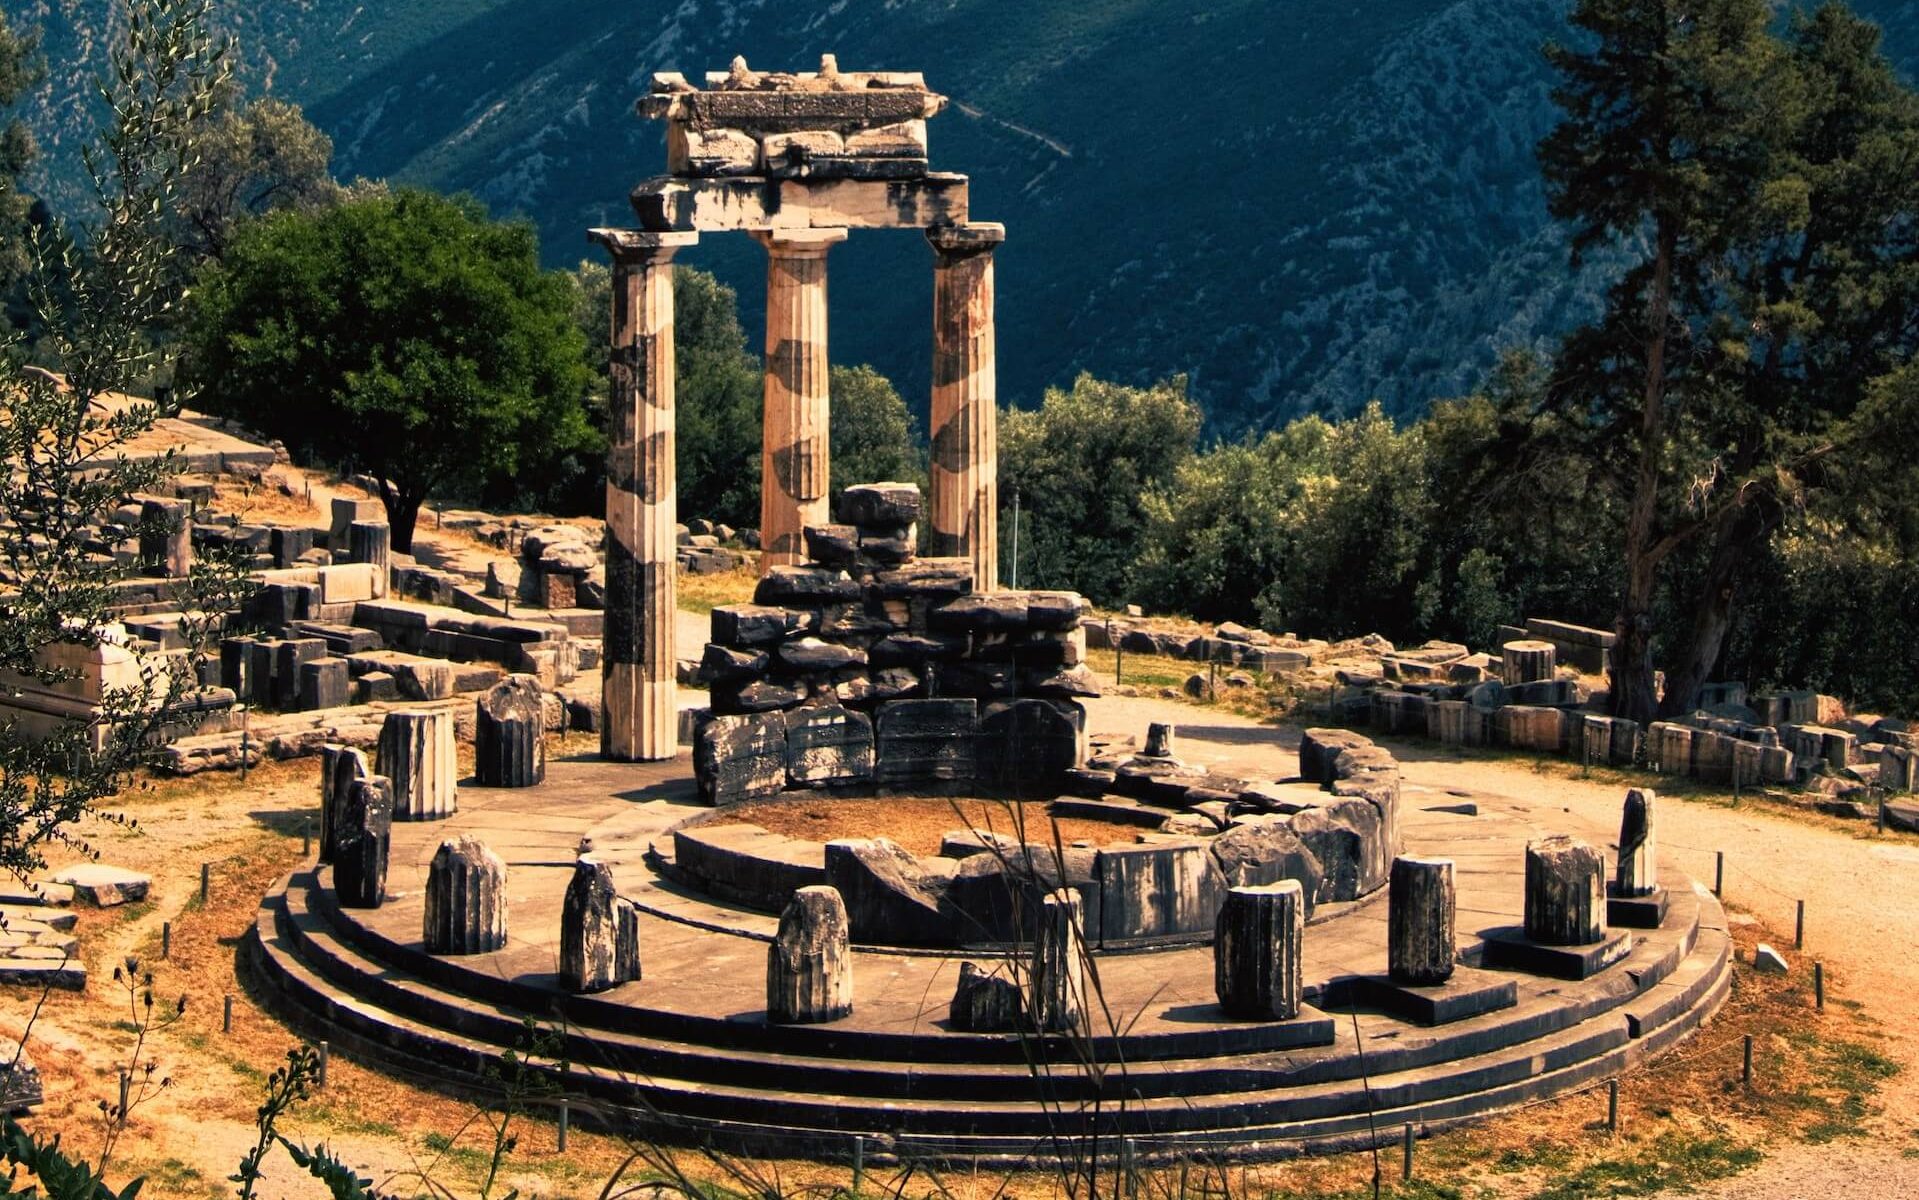 The Temple of Delphi in Greece, perched on the slopes of Mount Parnassus, a place steeped in myth and oracle.